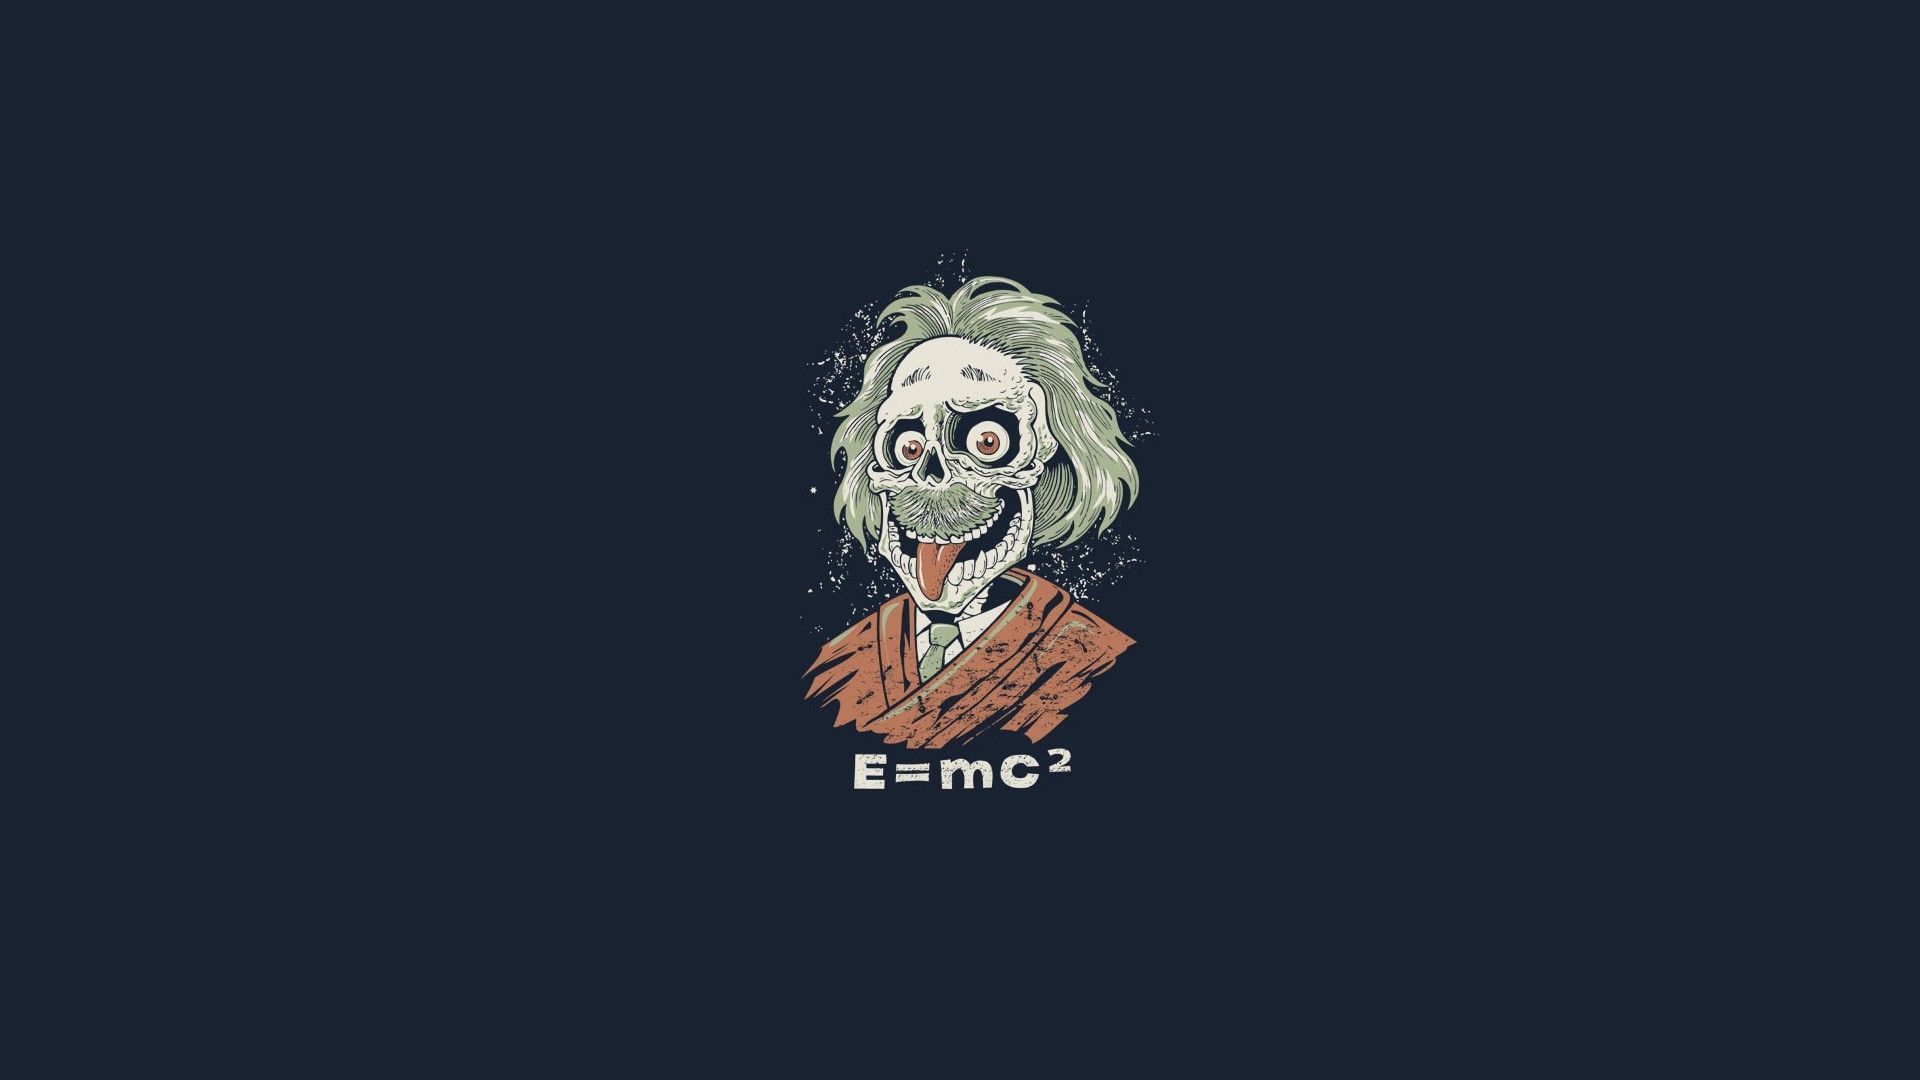 Download wallpaper zombies, e=mc Einstein, ghoul, section